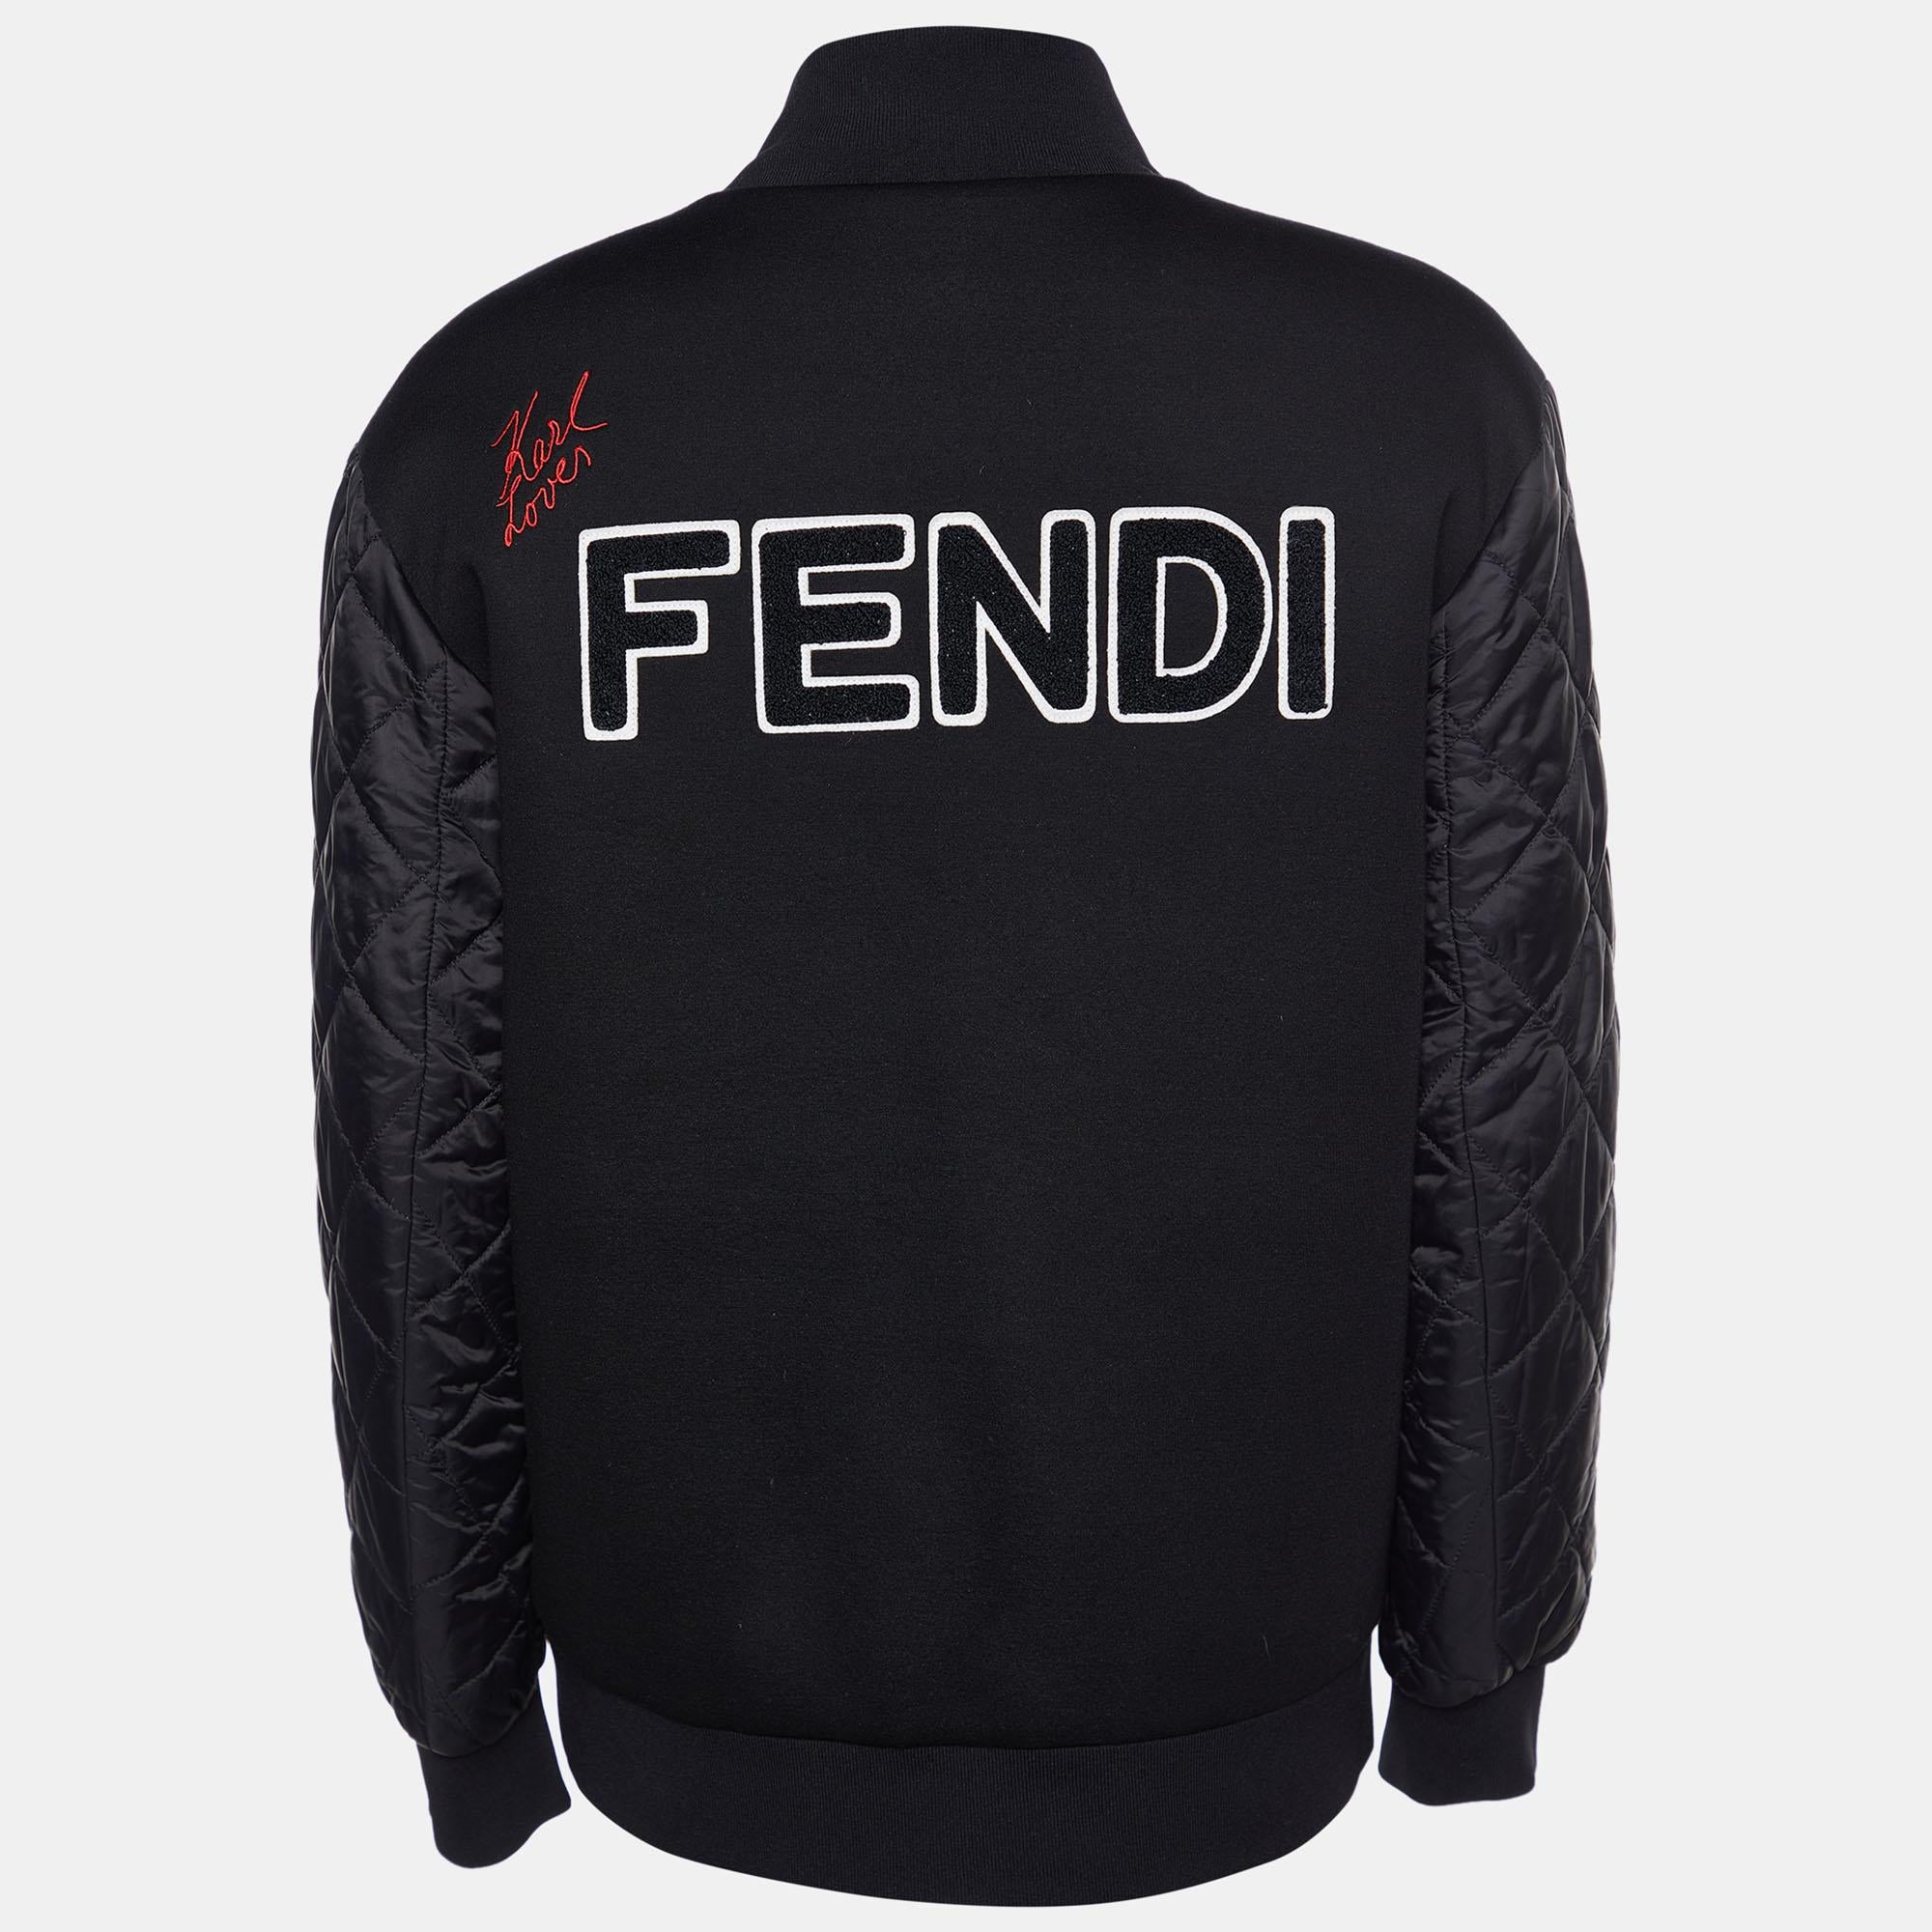 Celebrating its creative director-Karl Lagerfield, this Karlito bomber jacket from Fendi spells luxury like no other. The chic black jacket is made of a blend of fabrics and features Karl's face logo applique detailing on the front. It flaunts front